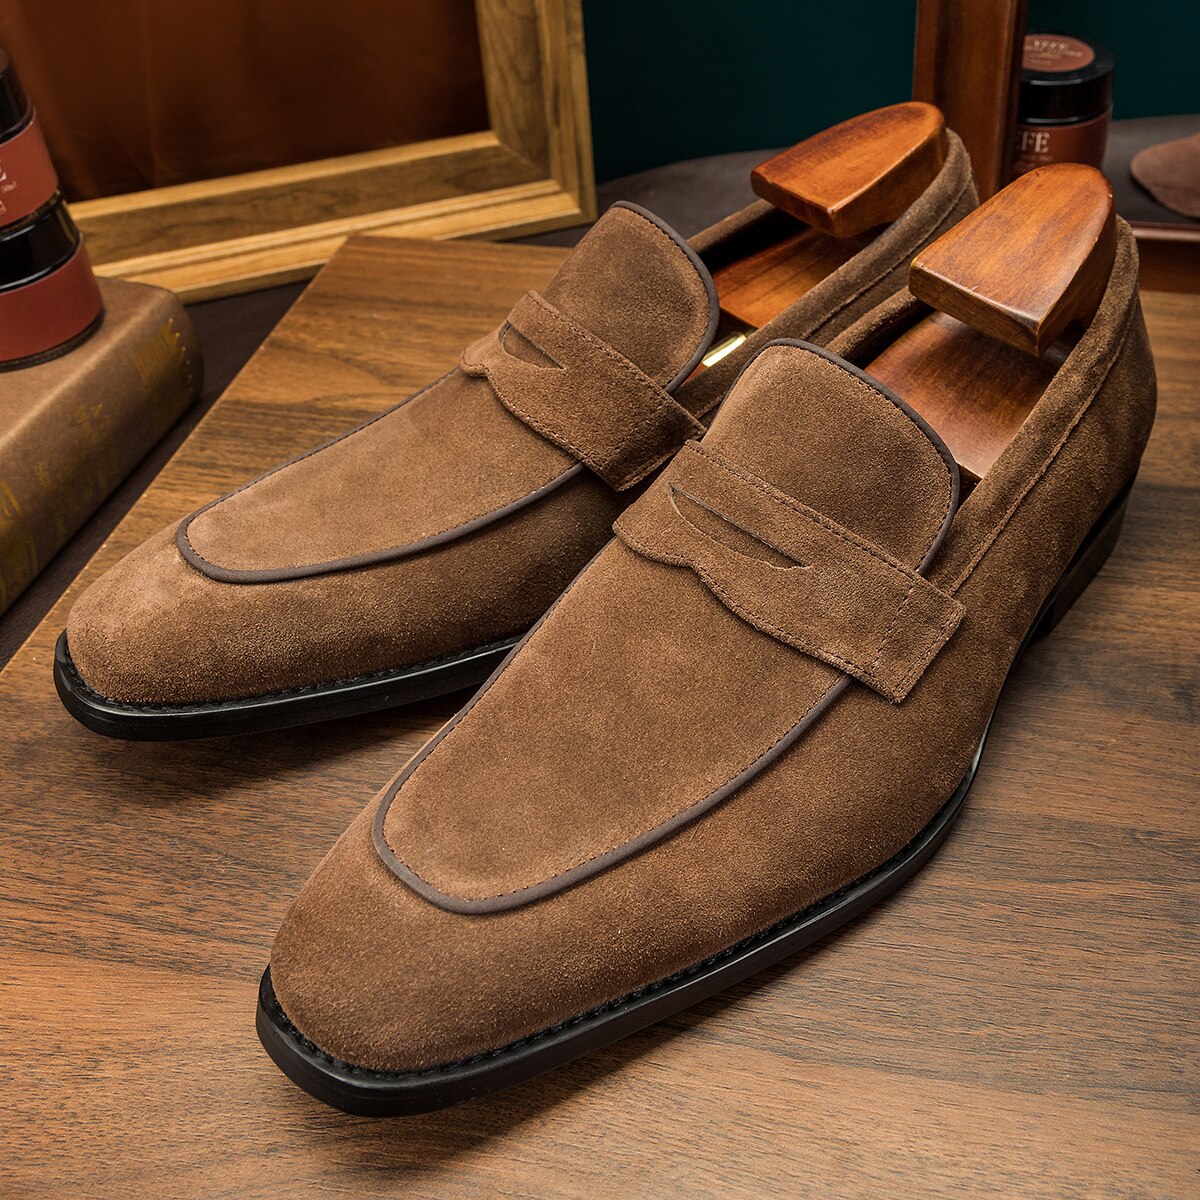 Men Dress Shoes High Quality Slip-On Genuine Leather Fashion Loafer Shoes